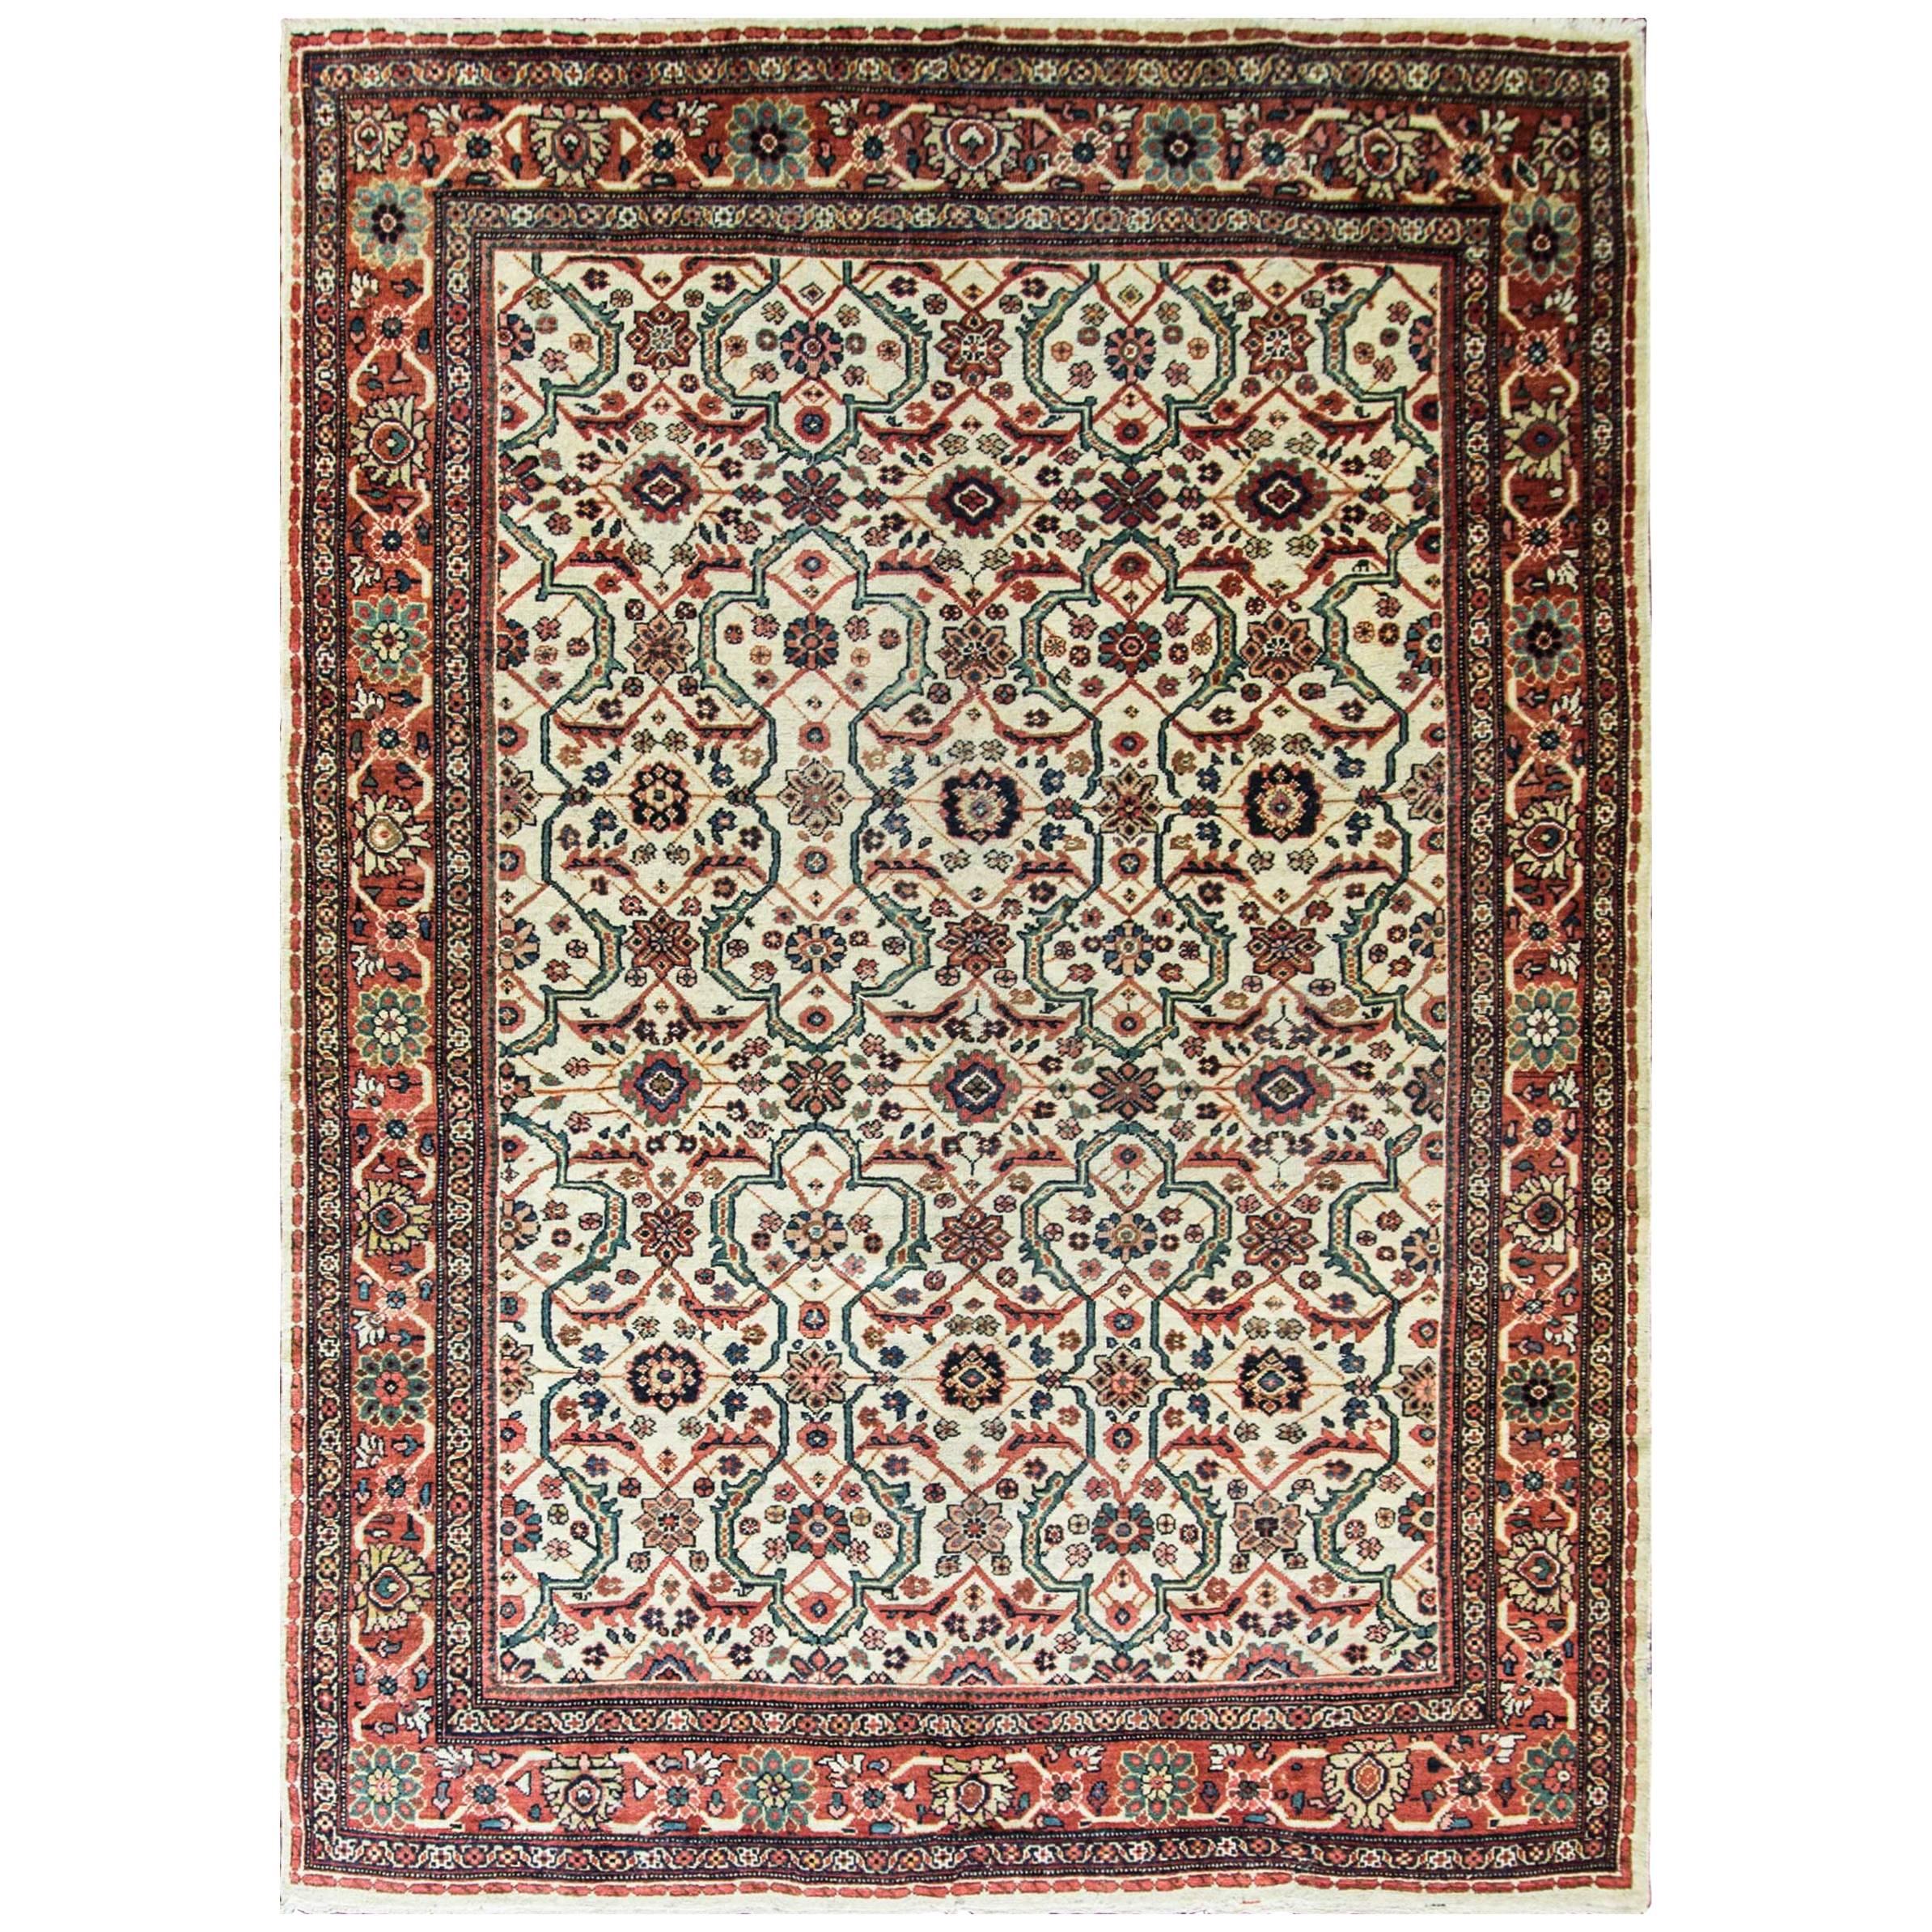  Antique Persian Sultanabad Carpet, 7' x 10' For Sale